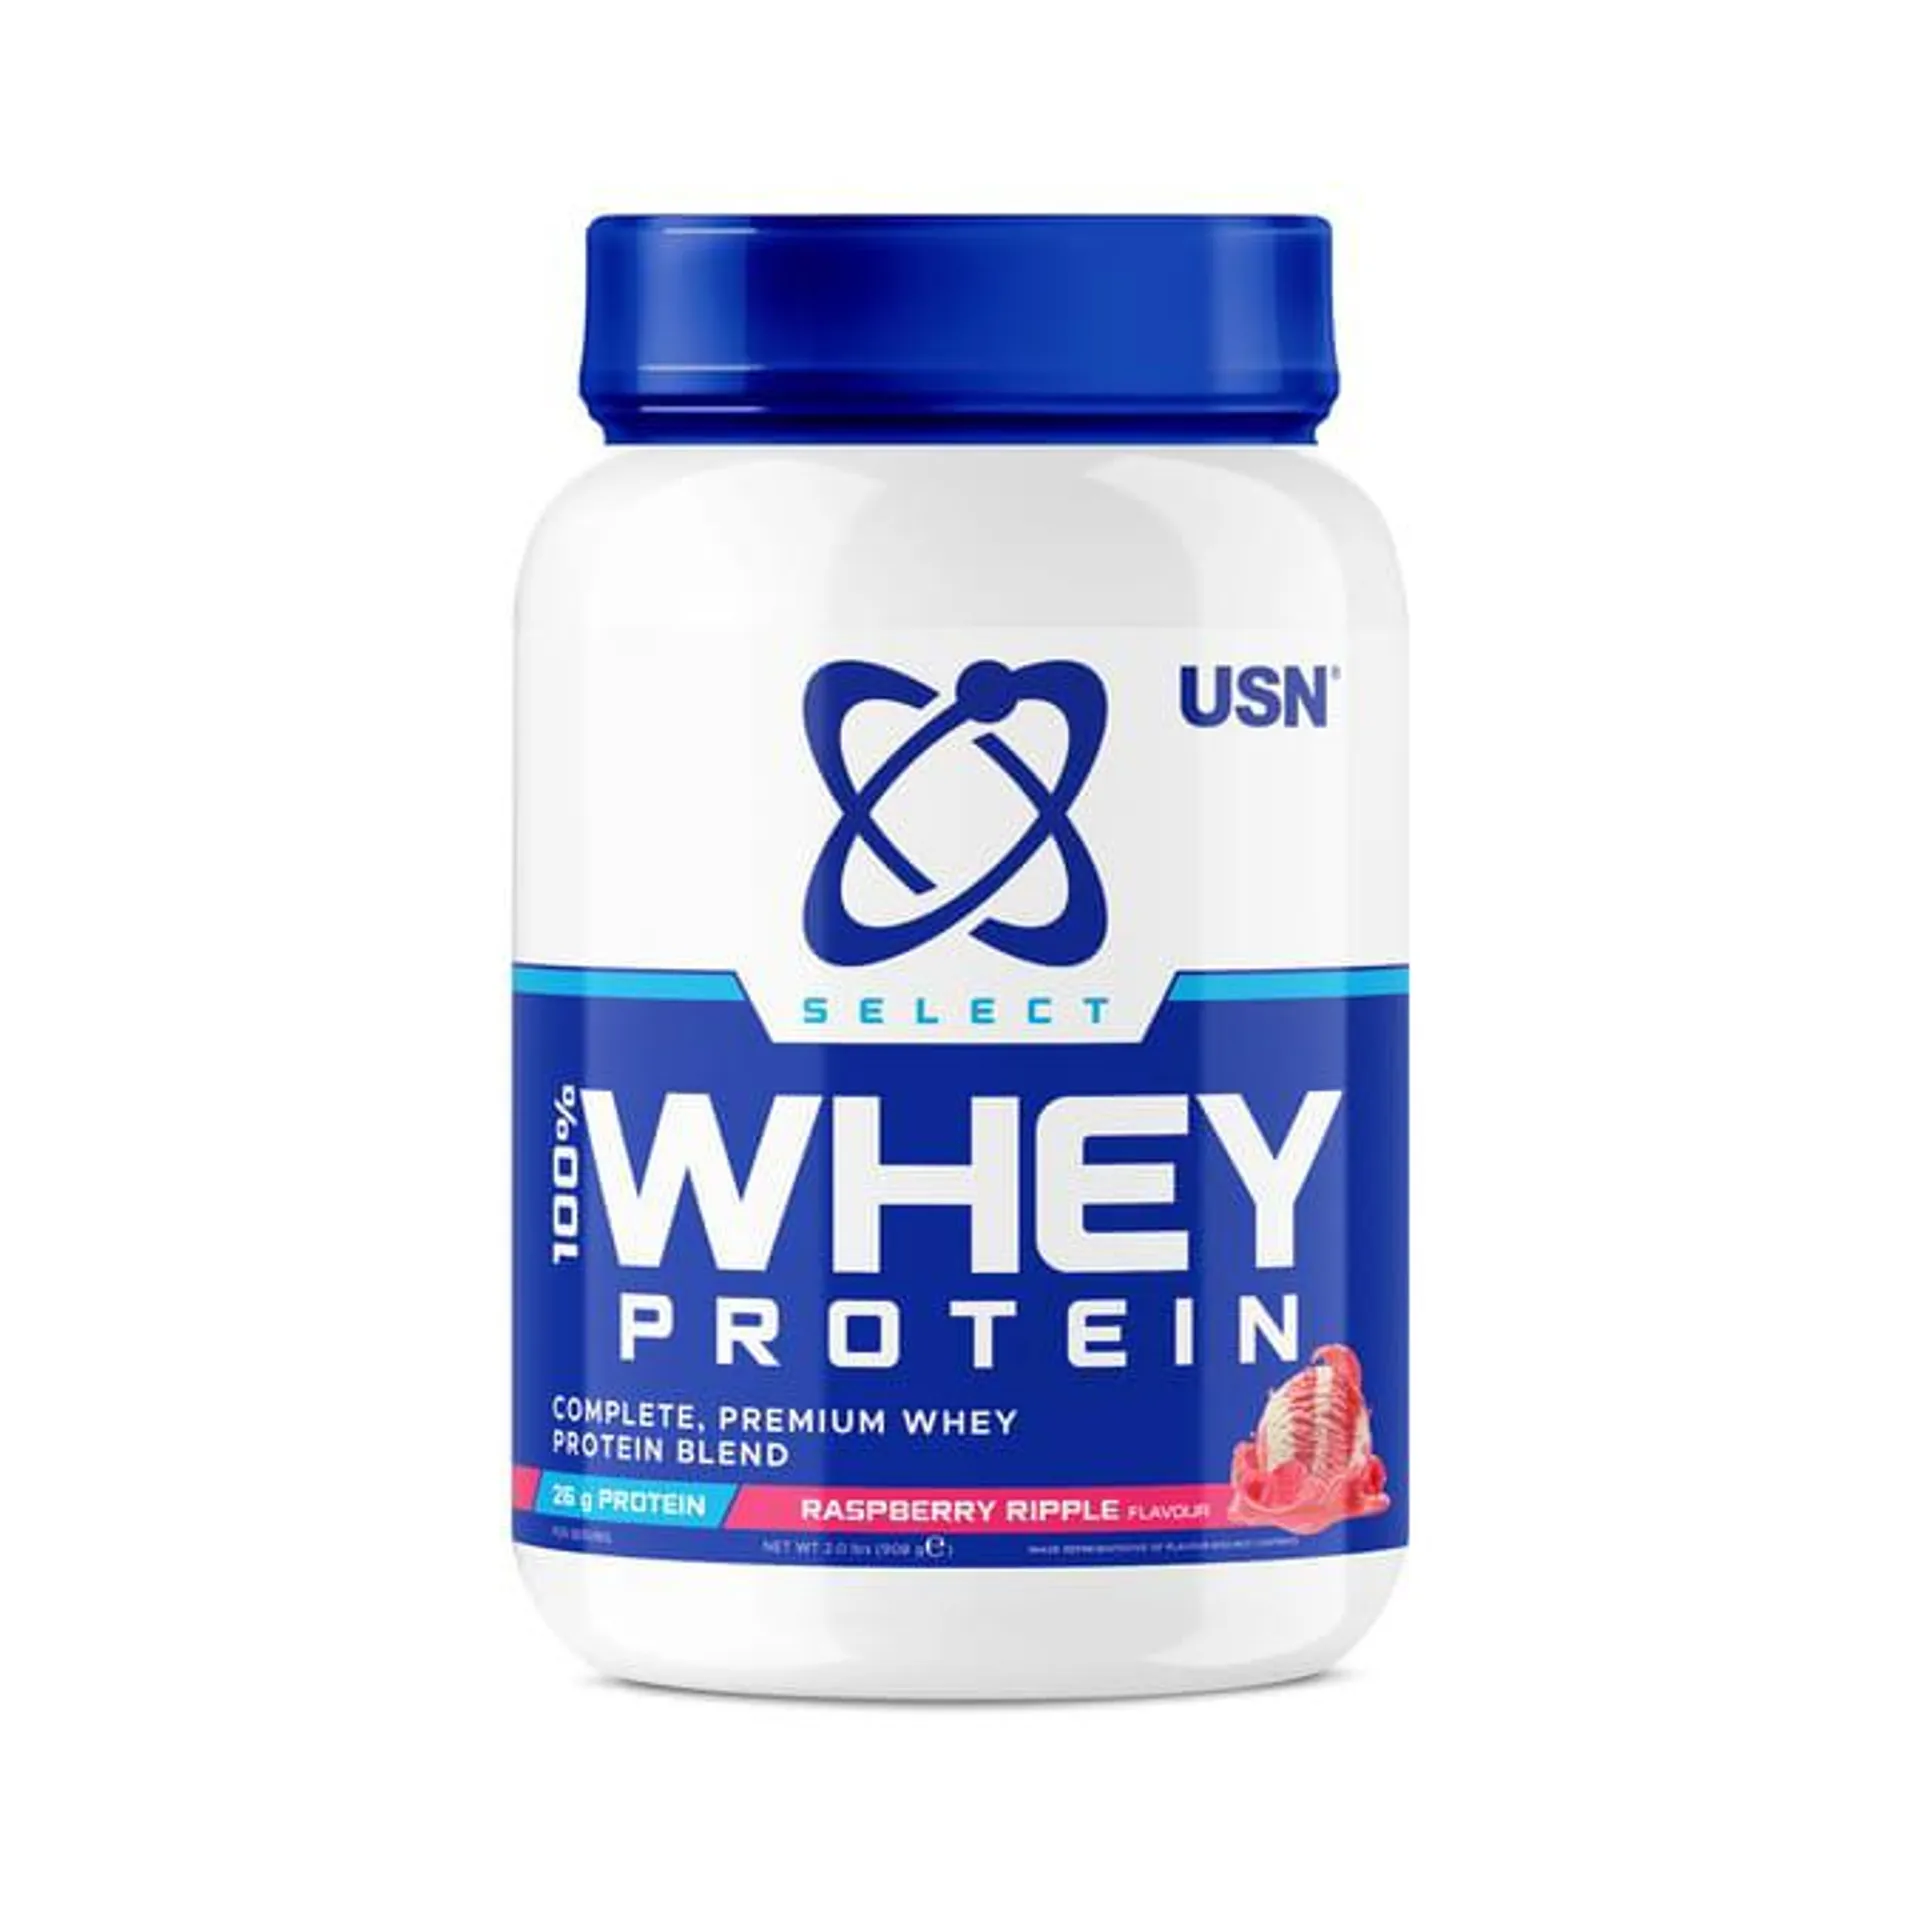 USN Selected 100% Whey Protein 908g - Raspberry Ripple